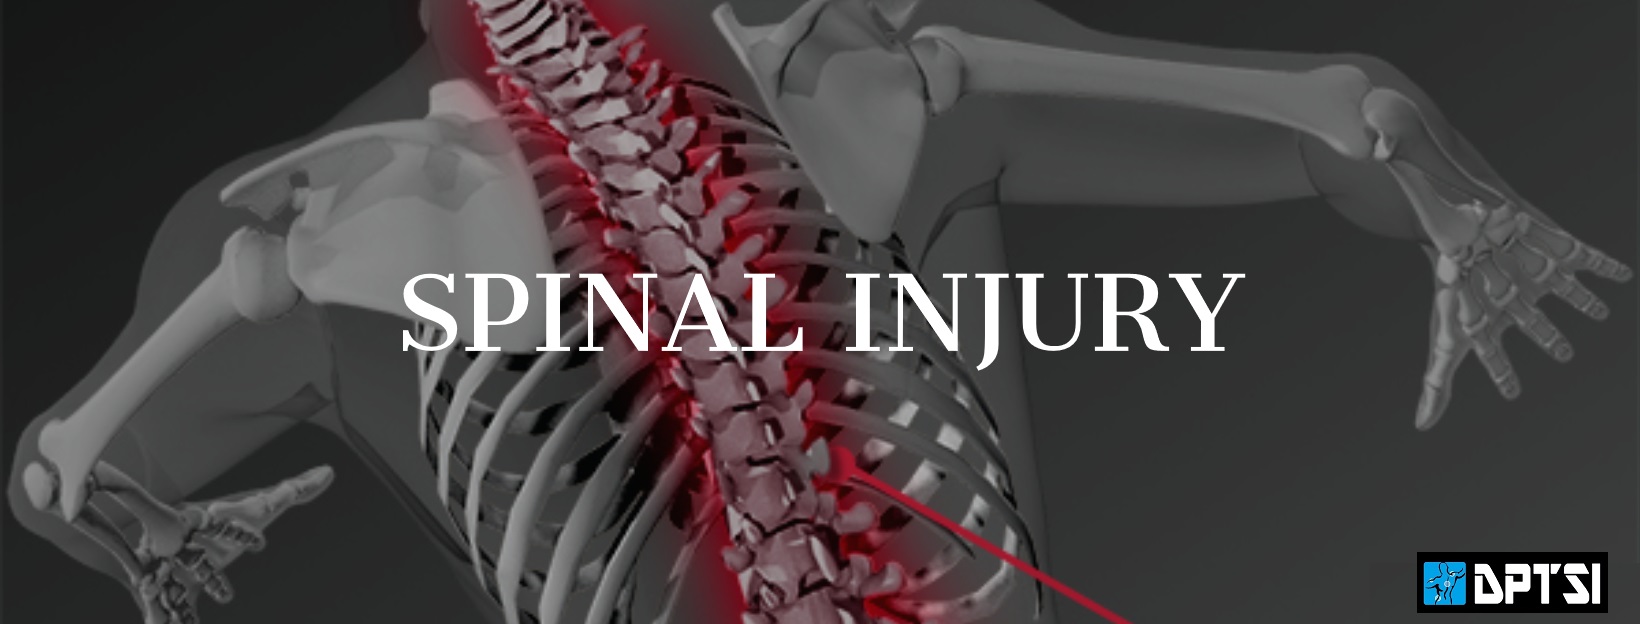 image-752151-Spinal_Injuries_Cover_Photo.jpg